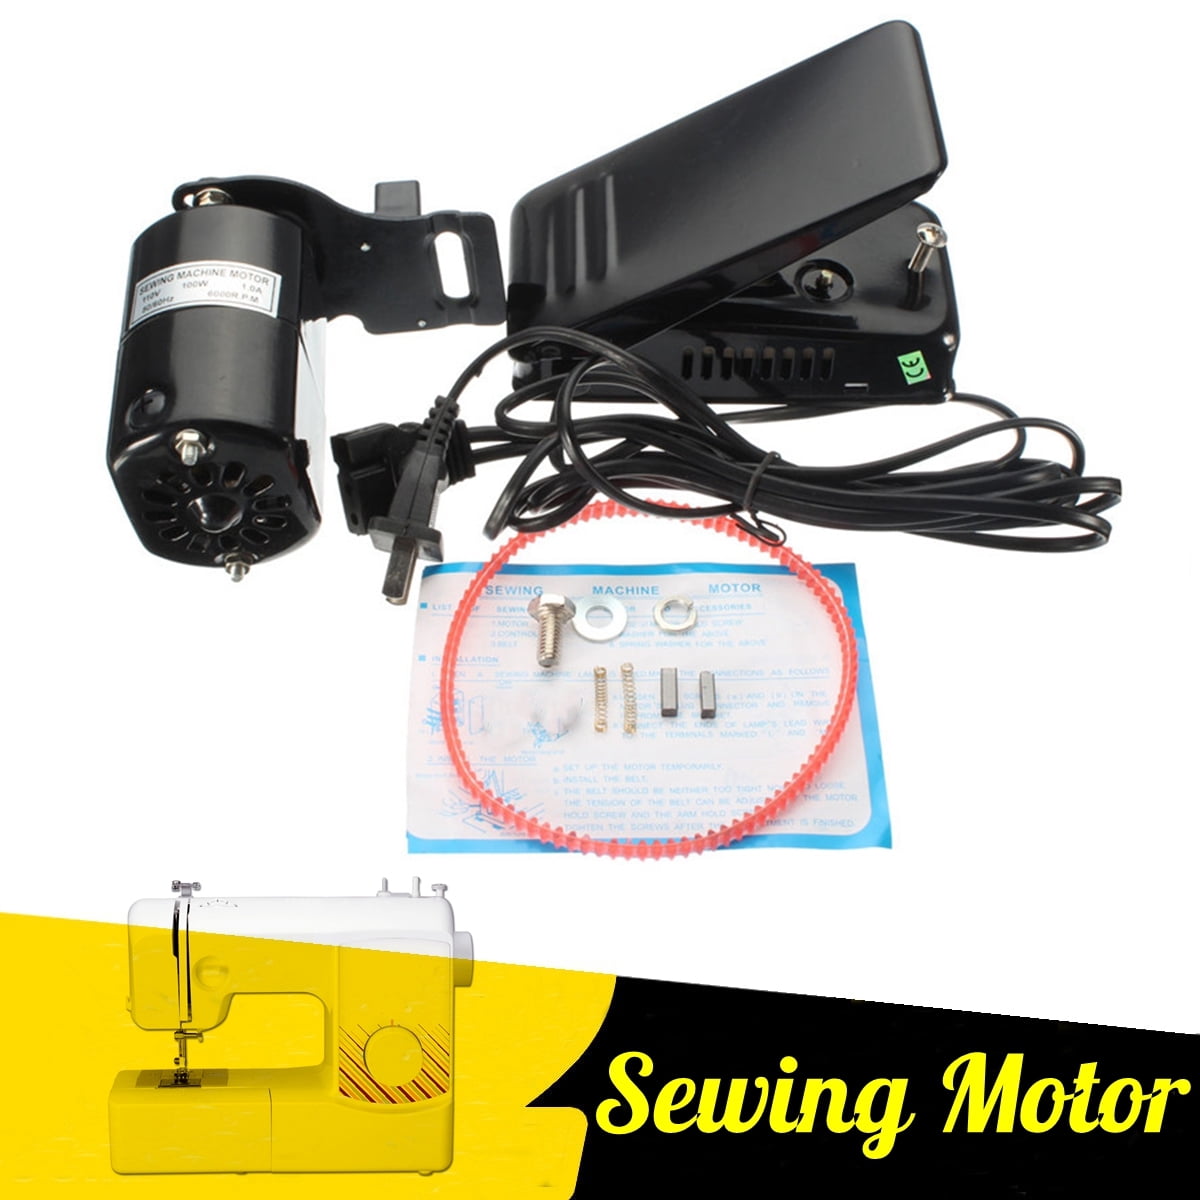 1.0 Amps Universal Home Household Sewing Machine Motor Foot Pedal HA1 15 66 99K 